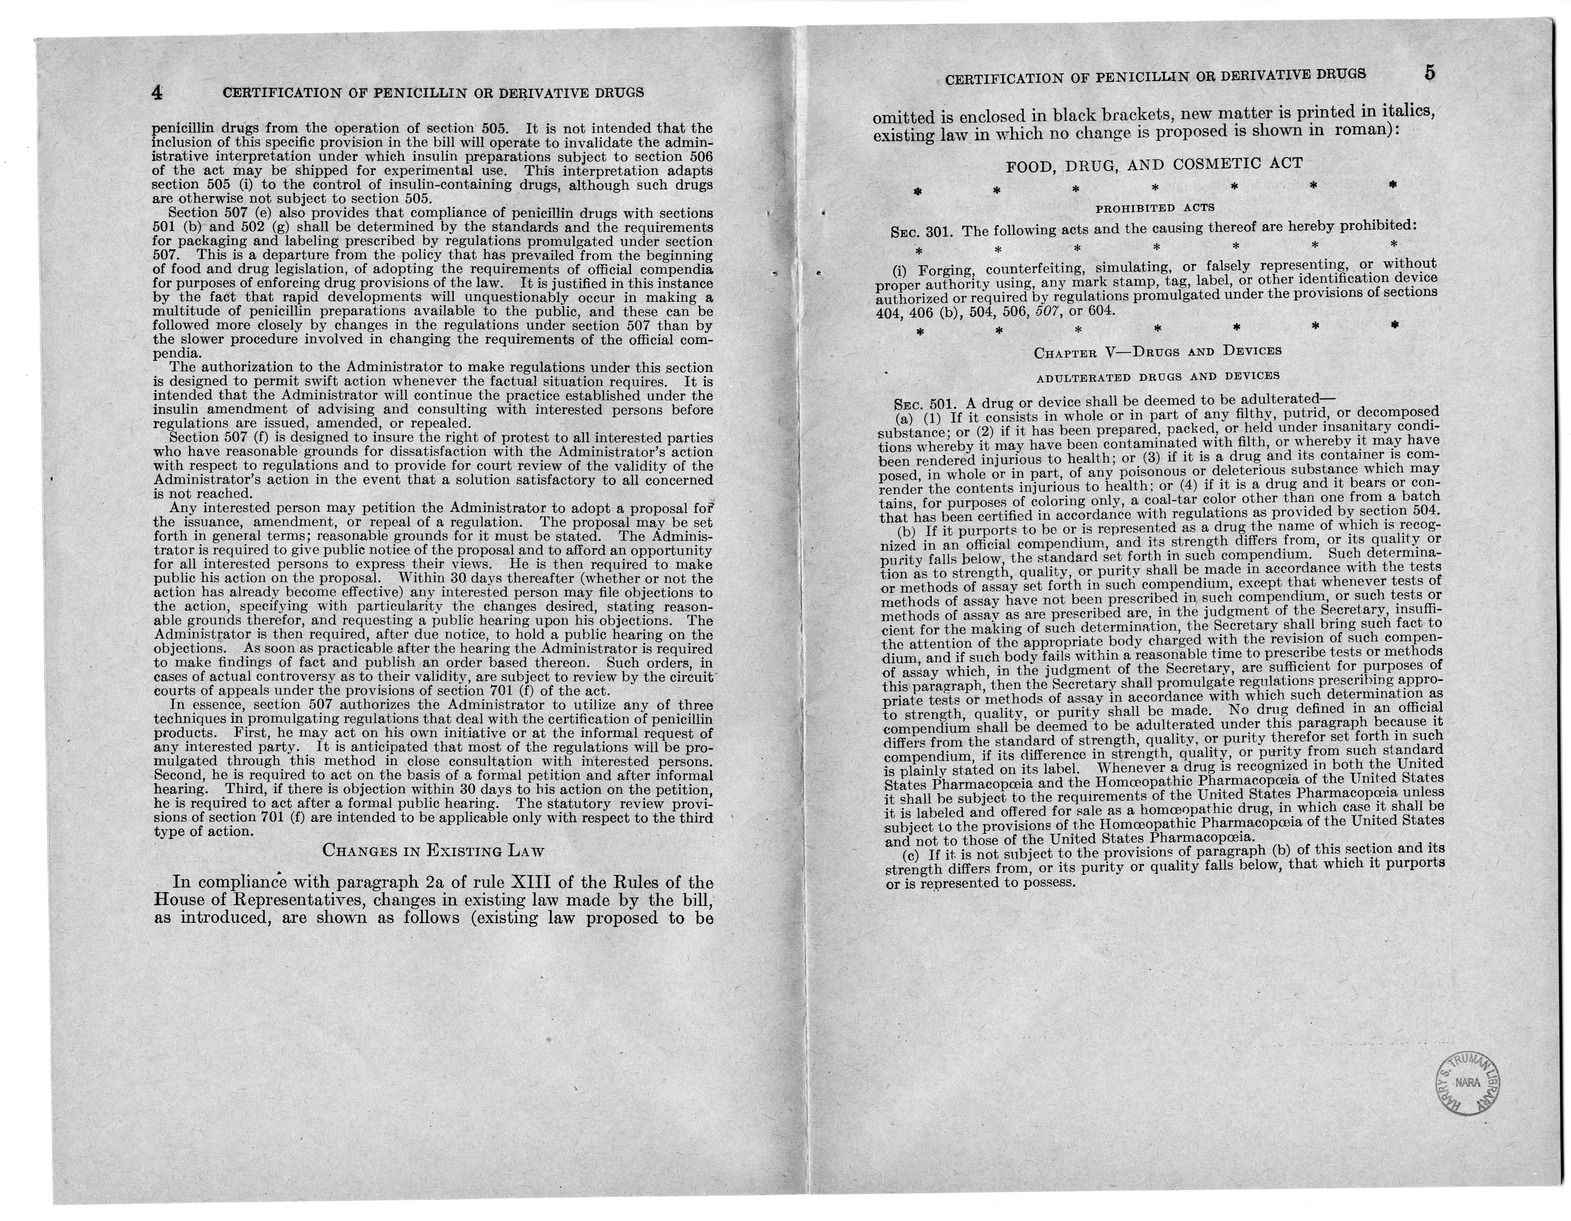 Memorandum from Harold D. Smith to M. C. Latta, H.R. 3266, To Amend the Federal Food, Drug, and Cosmetic Act of June 25, 1938, as Amended, by Providing for the Certification of Batches of Drugs Composed Wholly or Partly of any Kind of Penicillin or any De